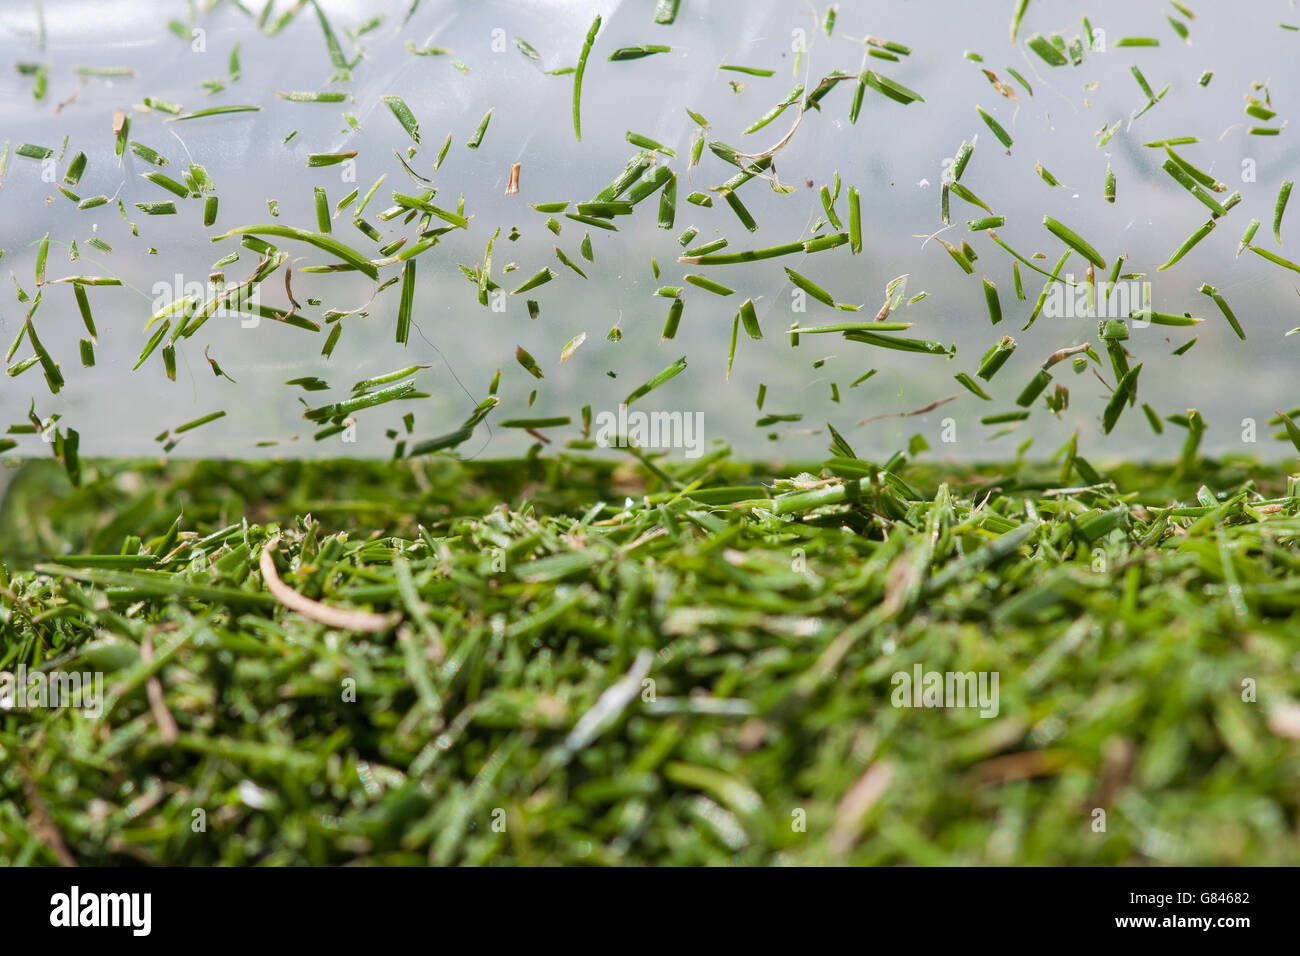 Close up macro lens photo shows grass cuttings in a plastic bag during day Four of the Wimbledon Championships at the All England Lawn Tennis and Croquet Club, Wimbledon. Stock Photo